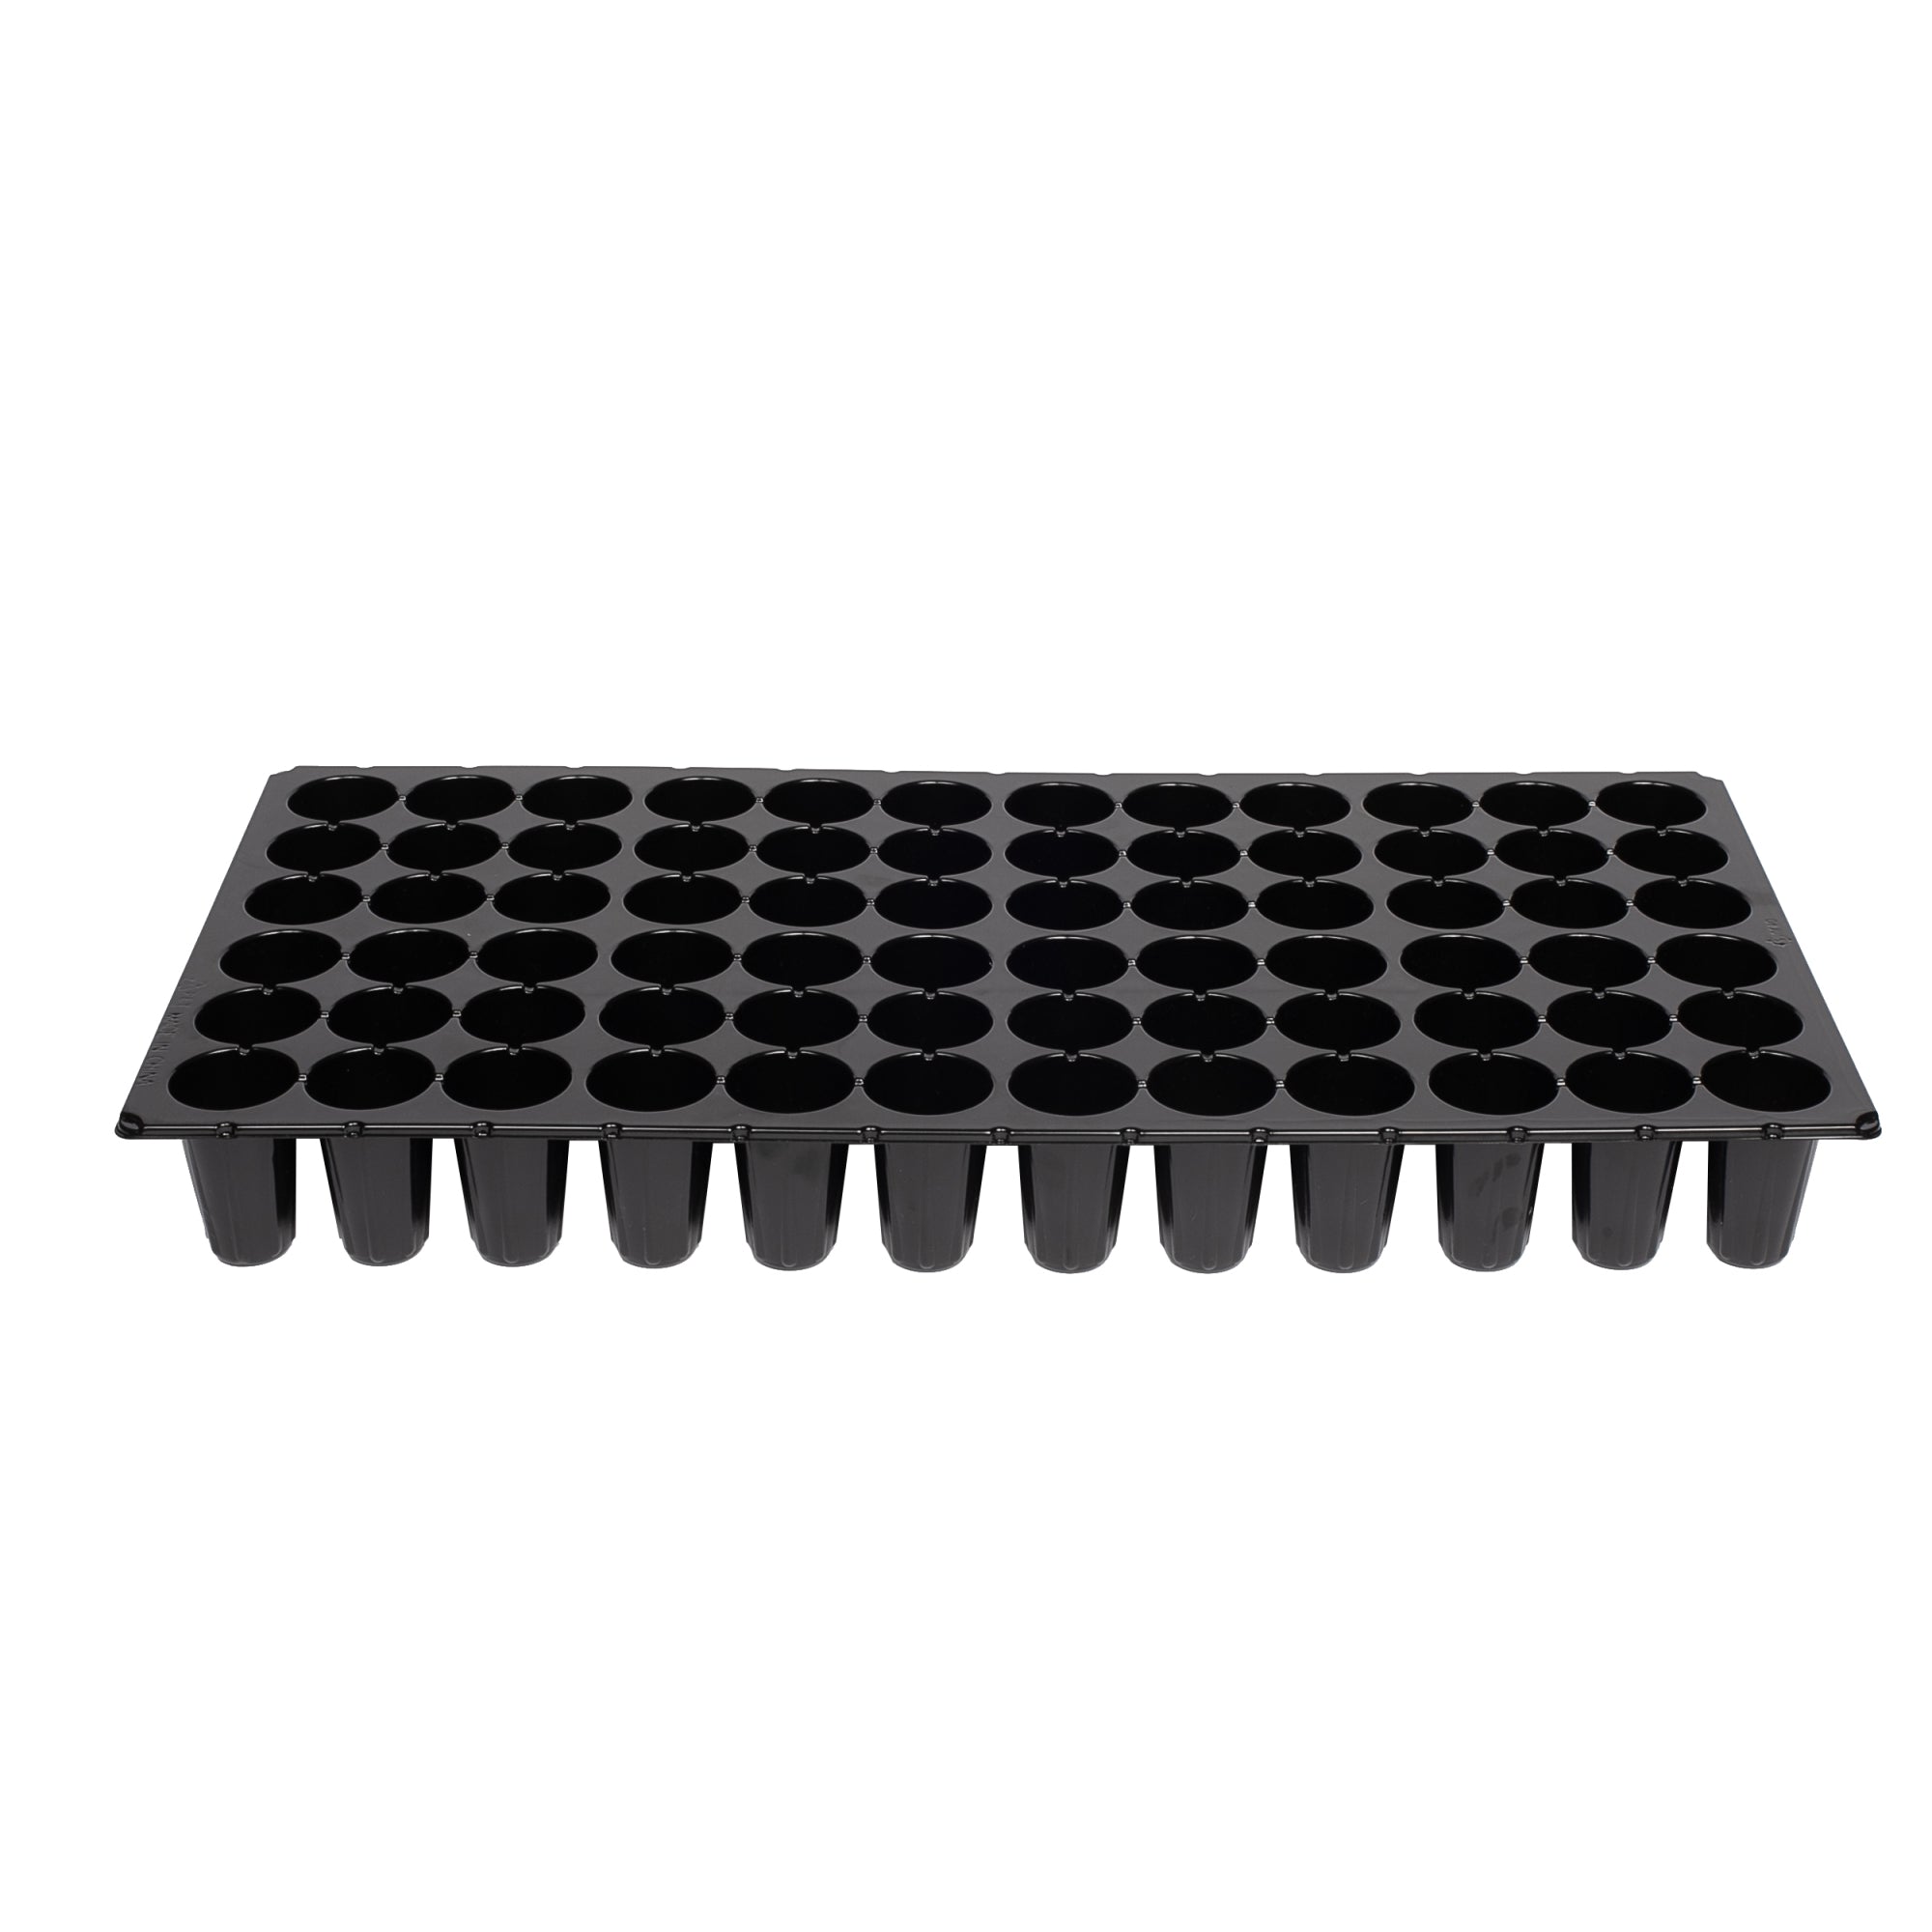 SunPack 21"x11" 72 Cell Round Insert, for Indoor Gardening, Greenhouses and Seeding, Black, fits 10x20 Tray